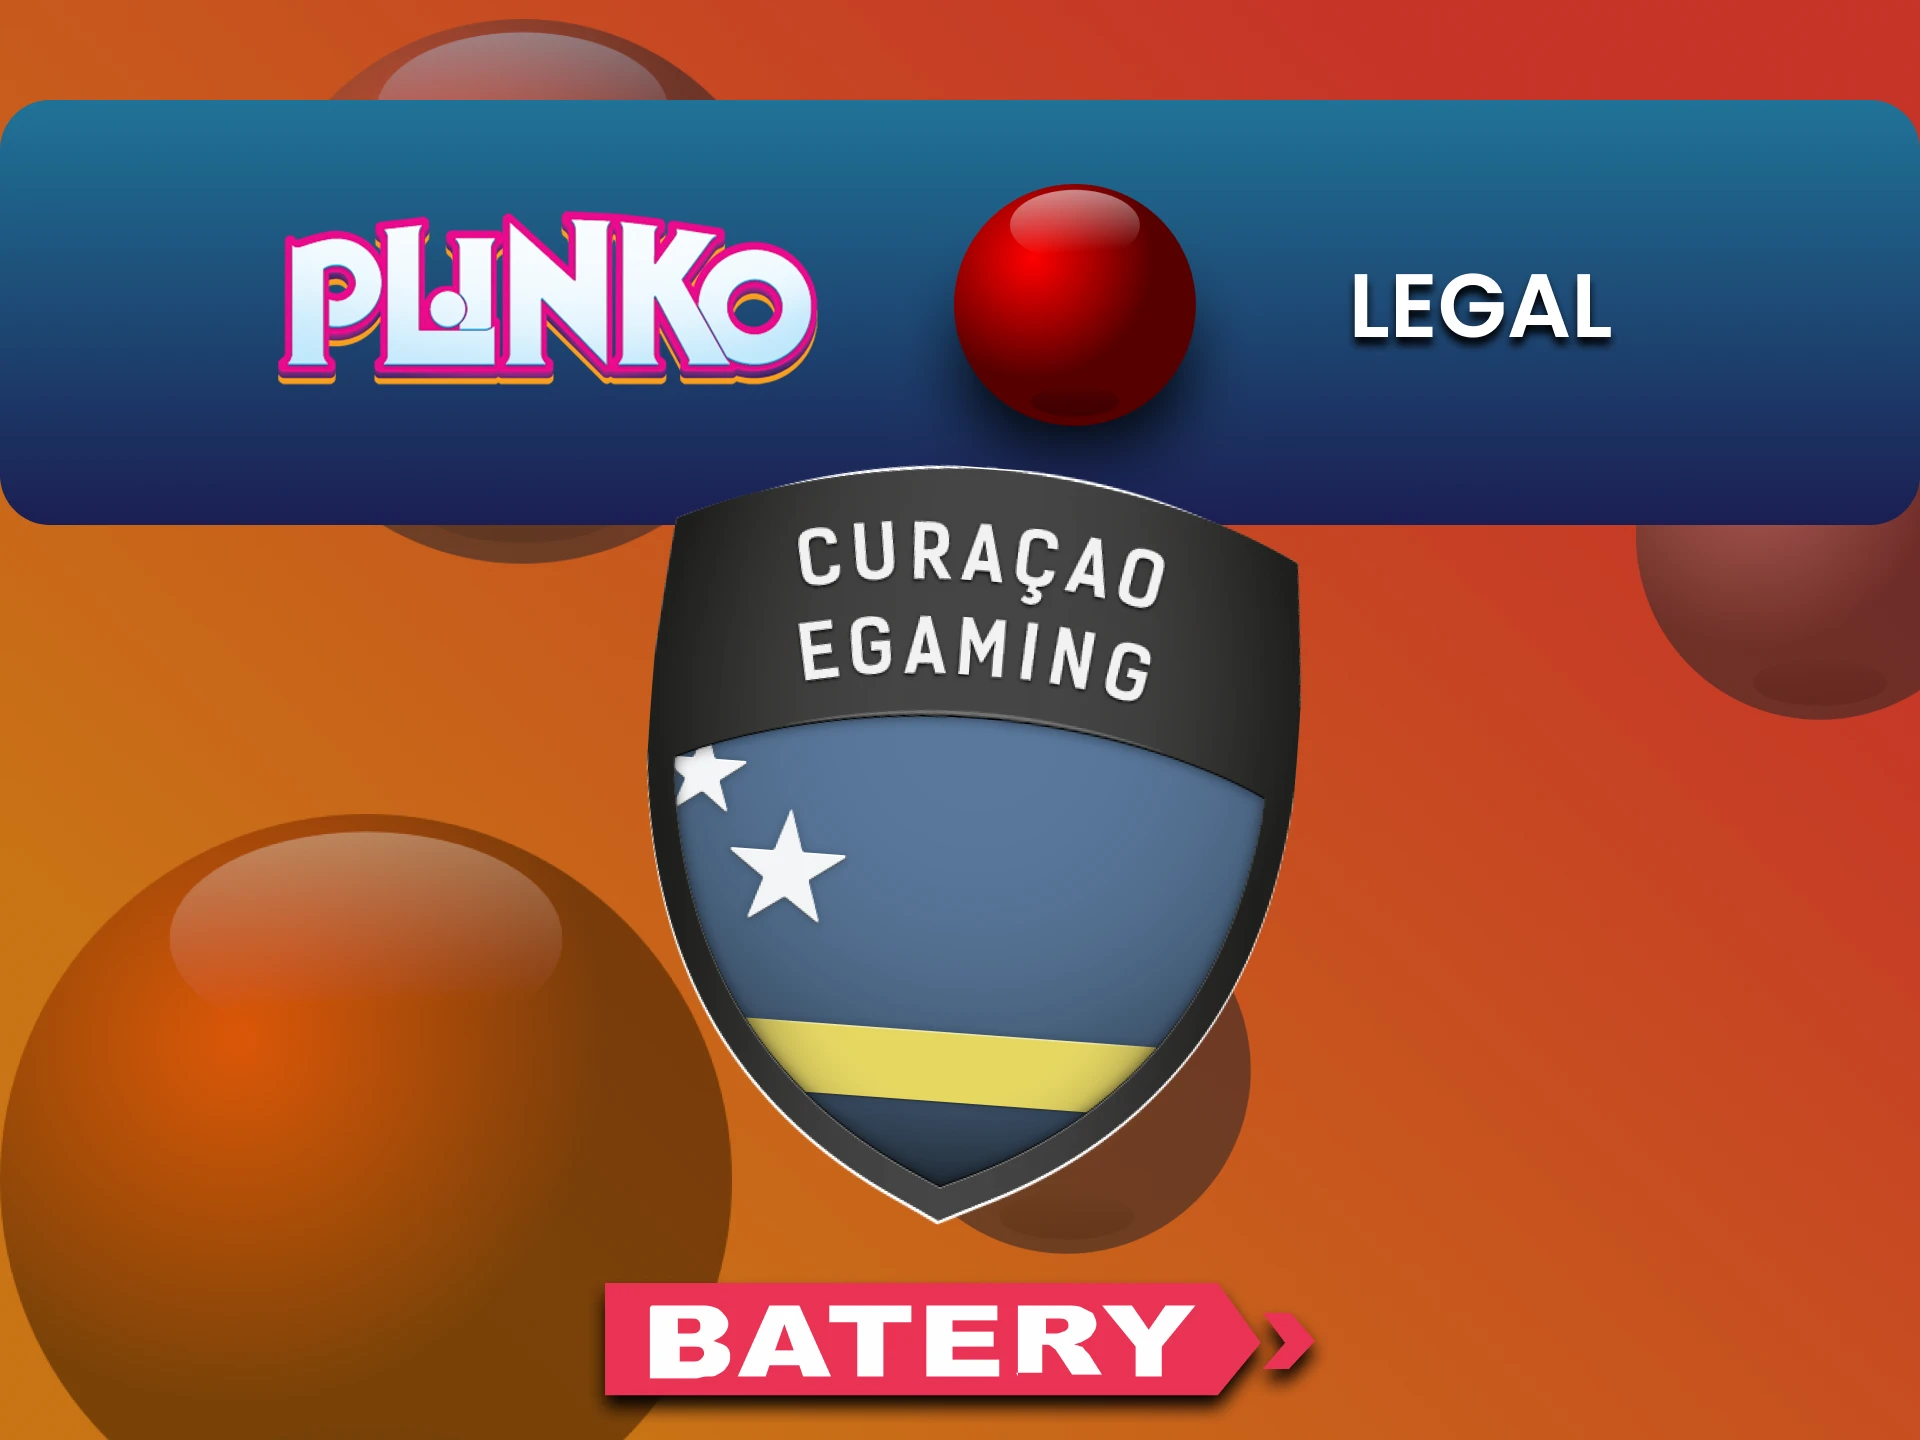 Batery is legal for Plinko users.